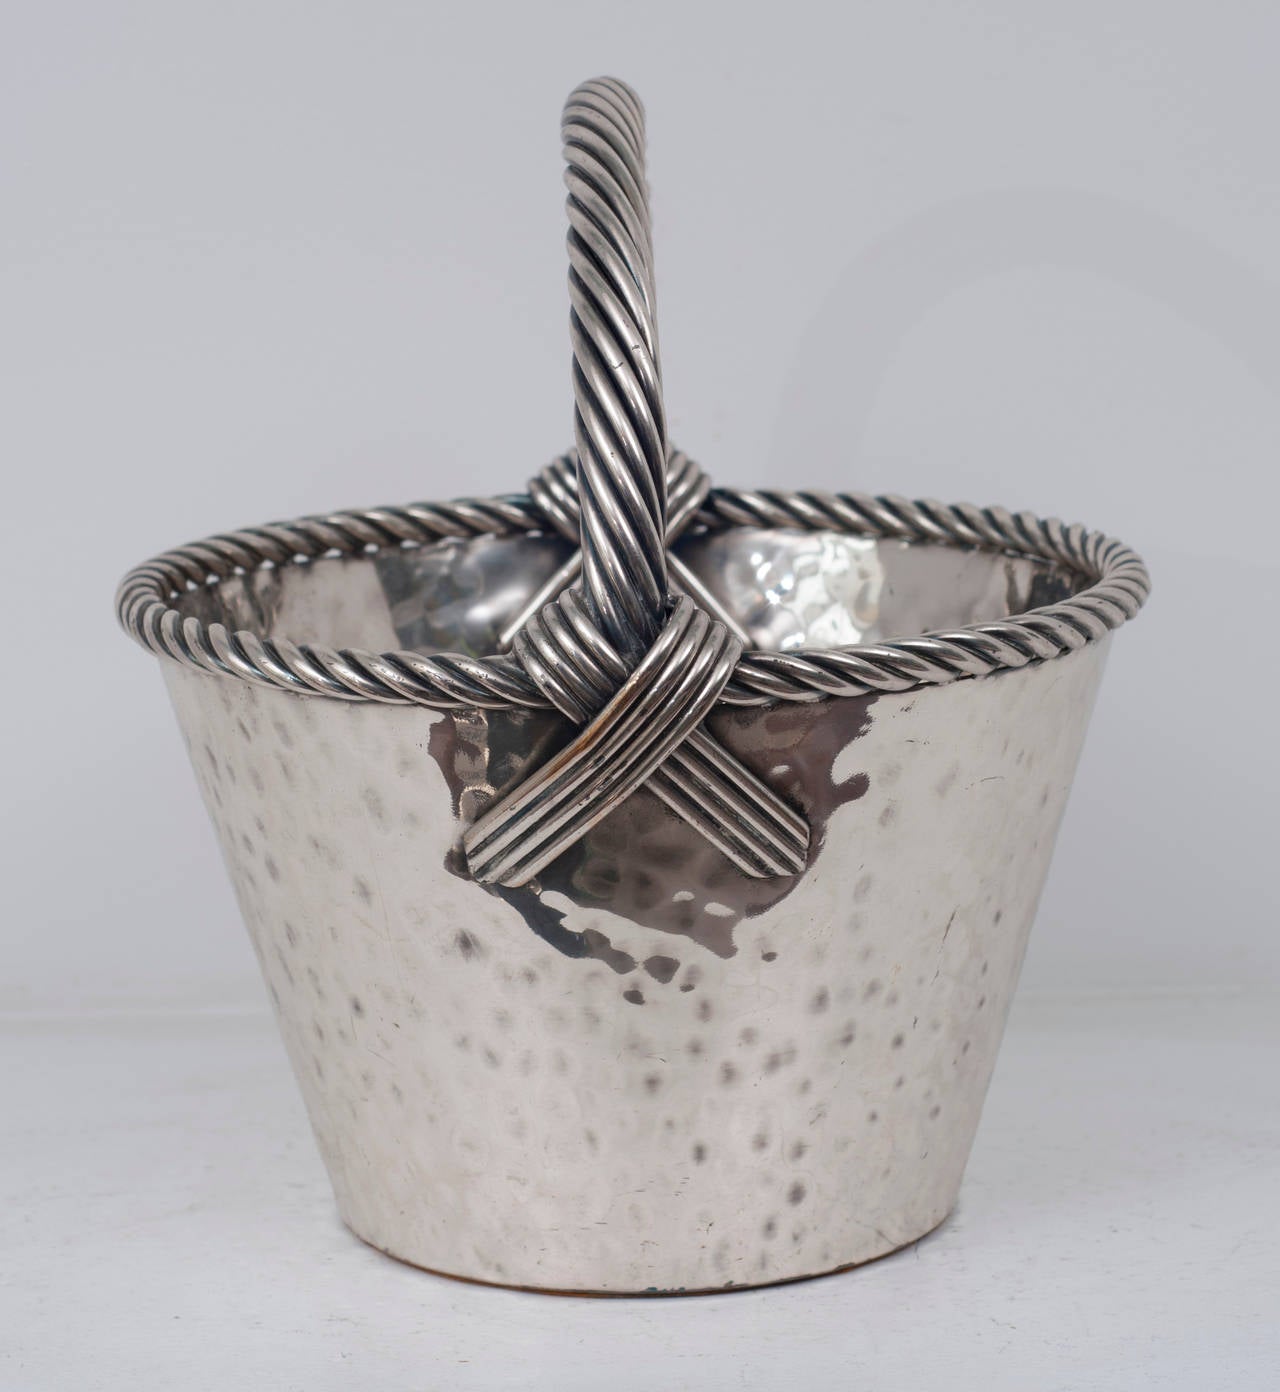 A silver plate basket with a rope handle.